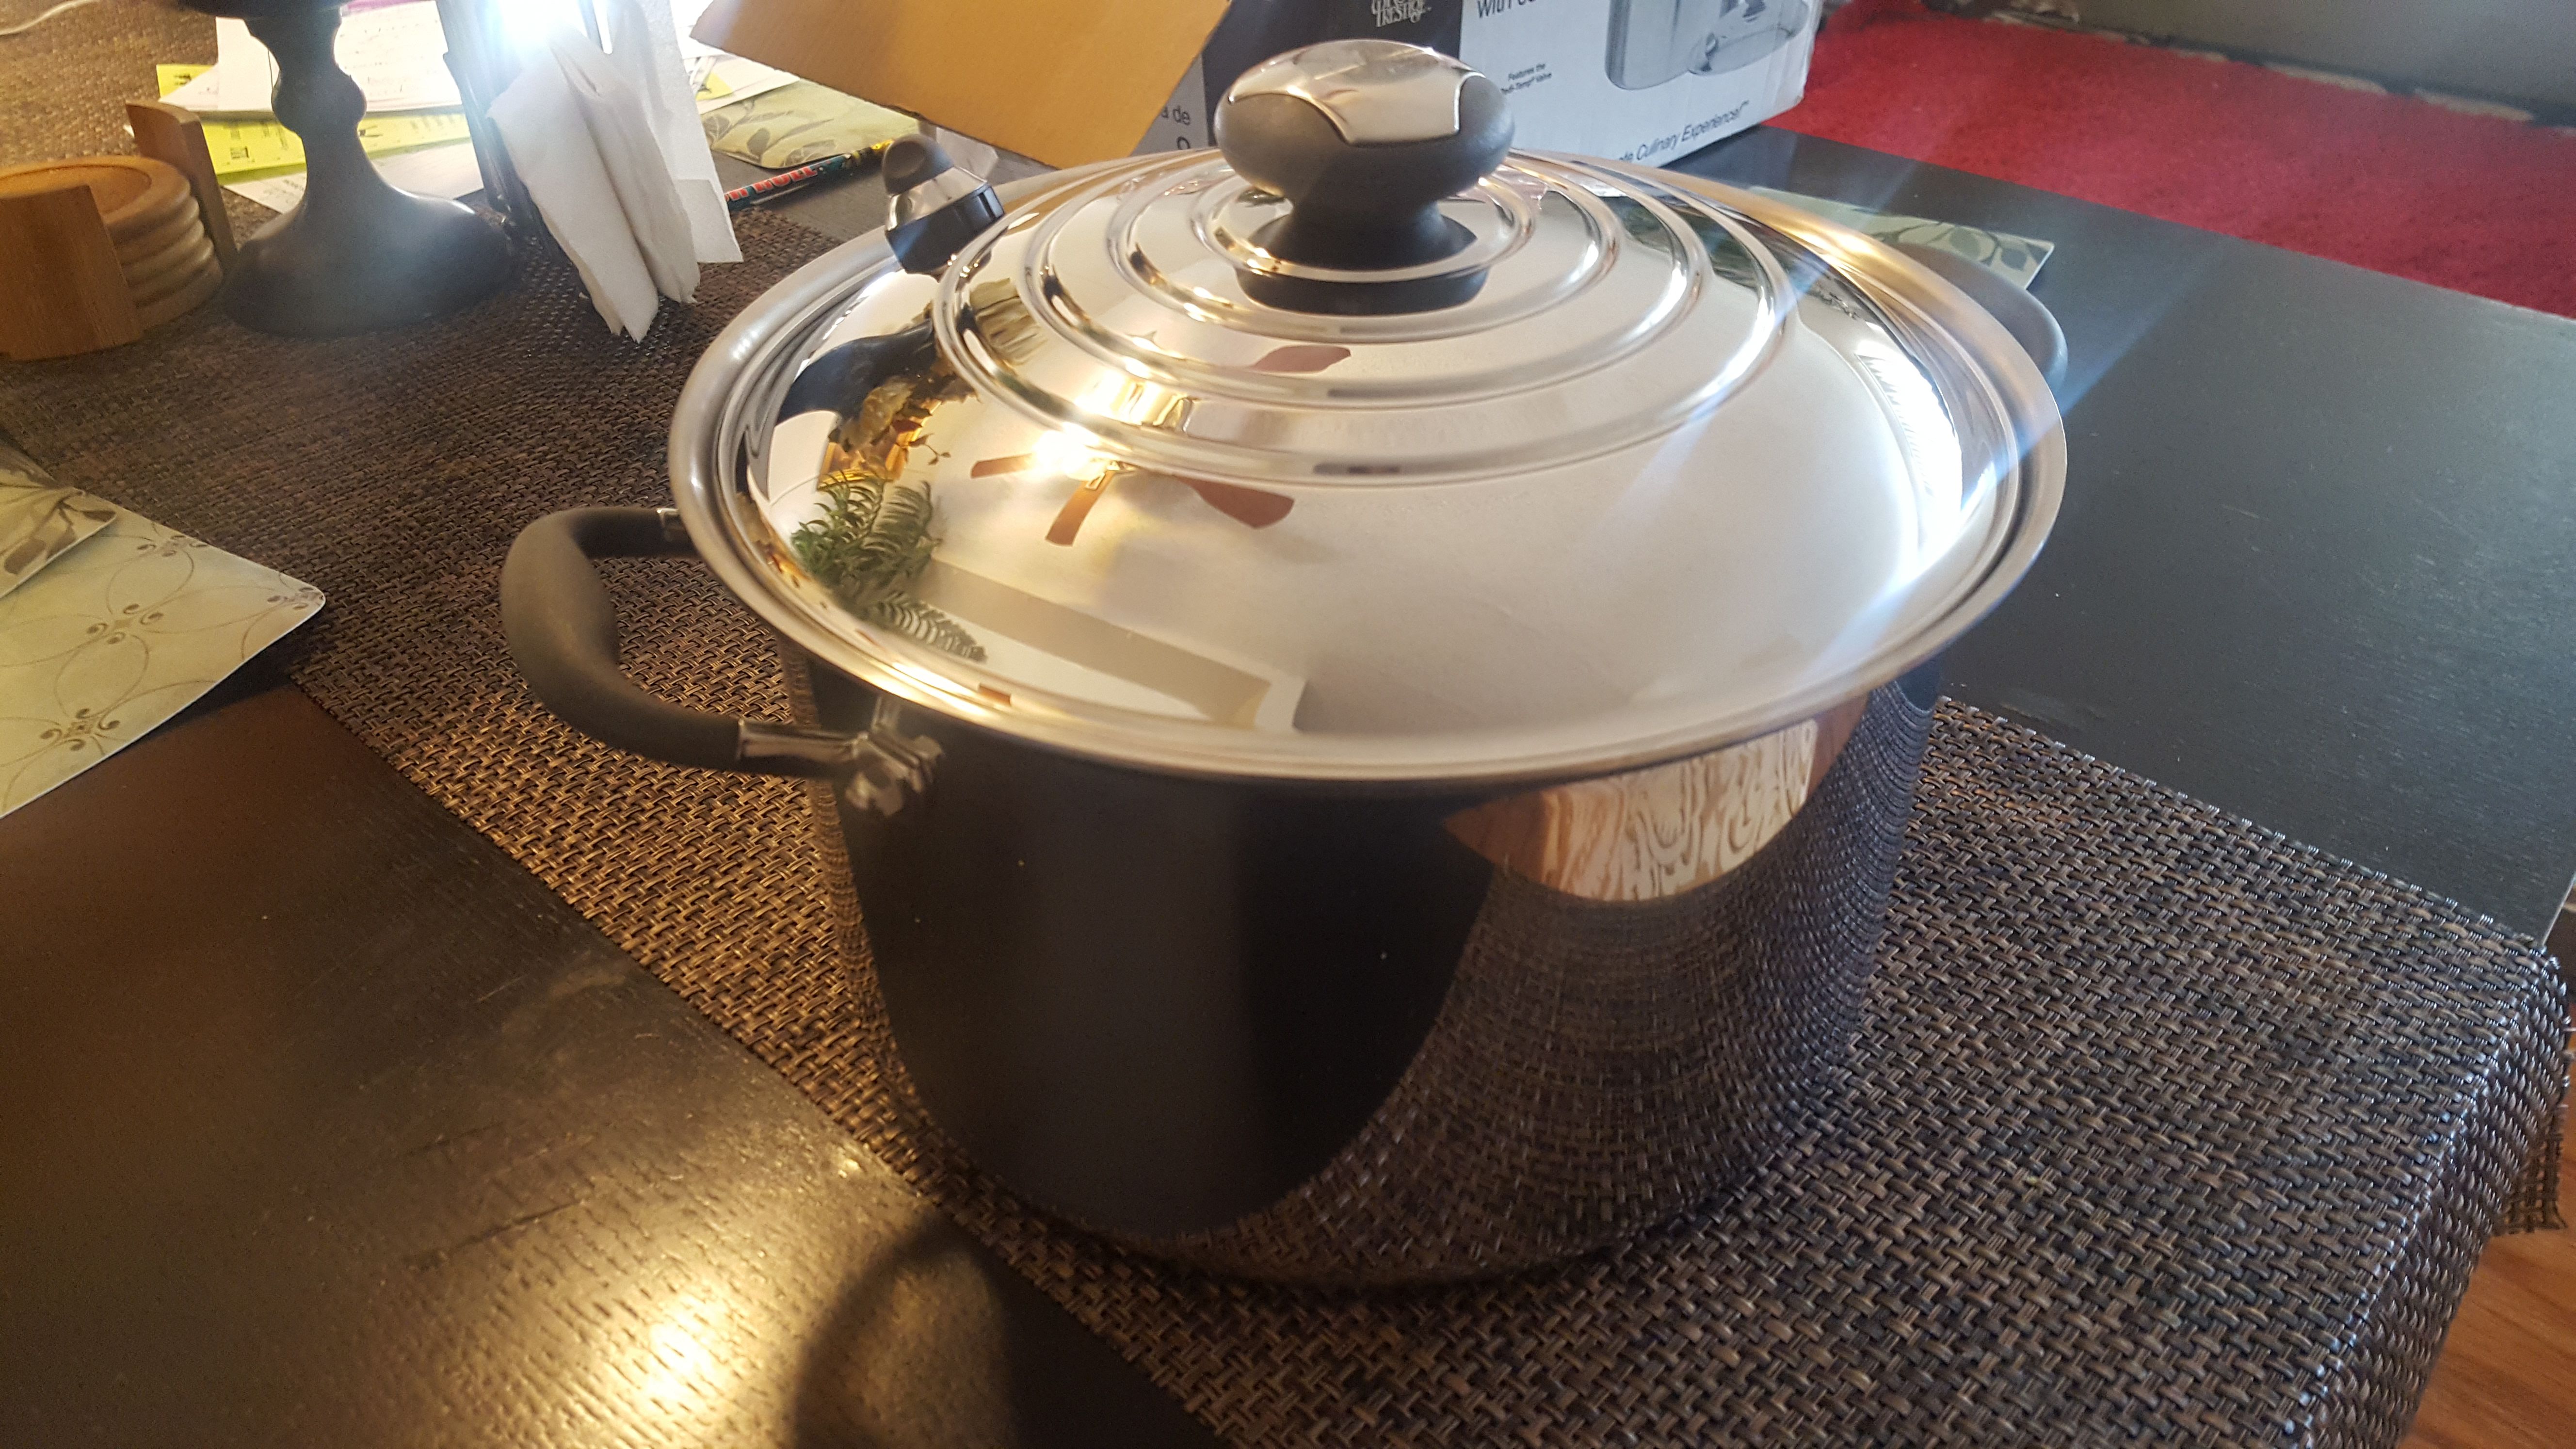 Red Stone 6 Quart Dutch Oven for Sale in St. Cloud, FL - OfferUp